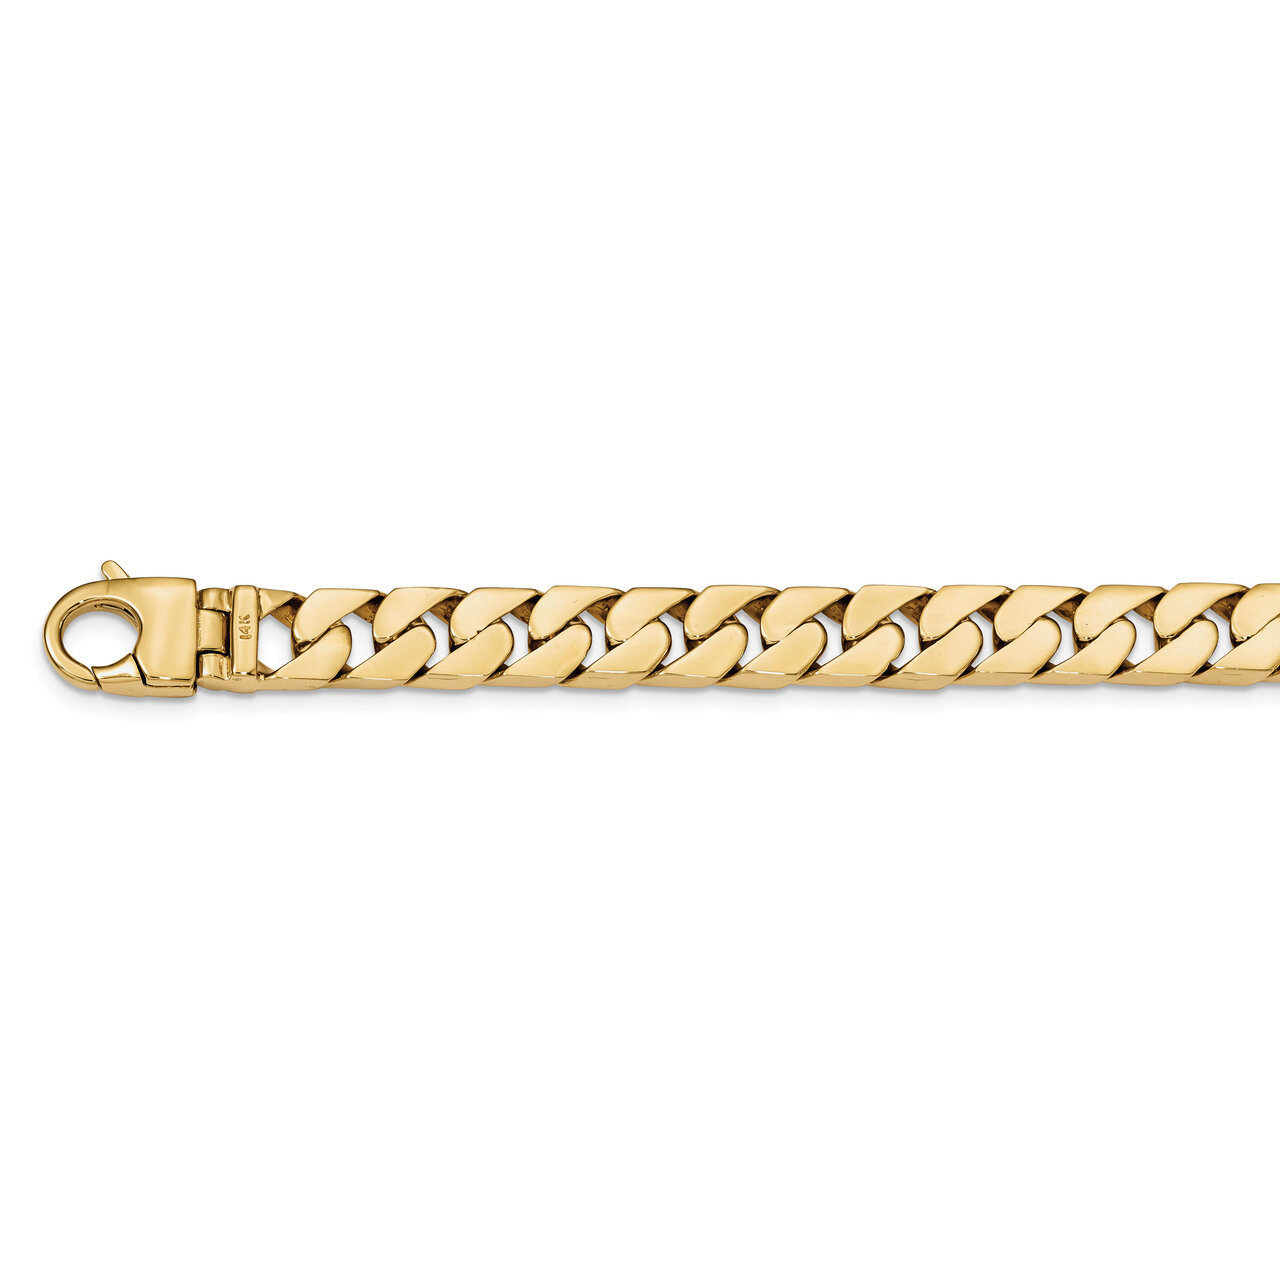 20 Inch 10.20mm Hand-polished Long Link Half Round Curb Chain 14k Gold LK590-20